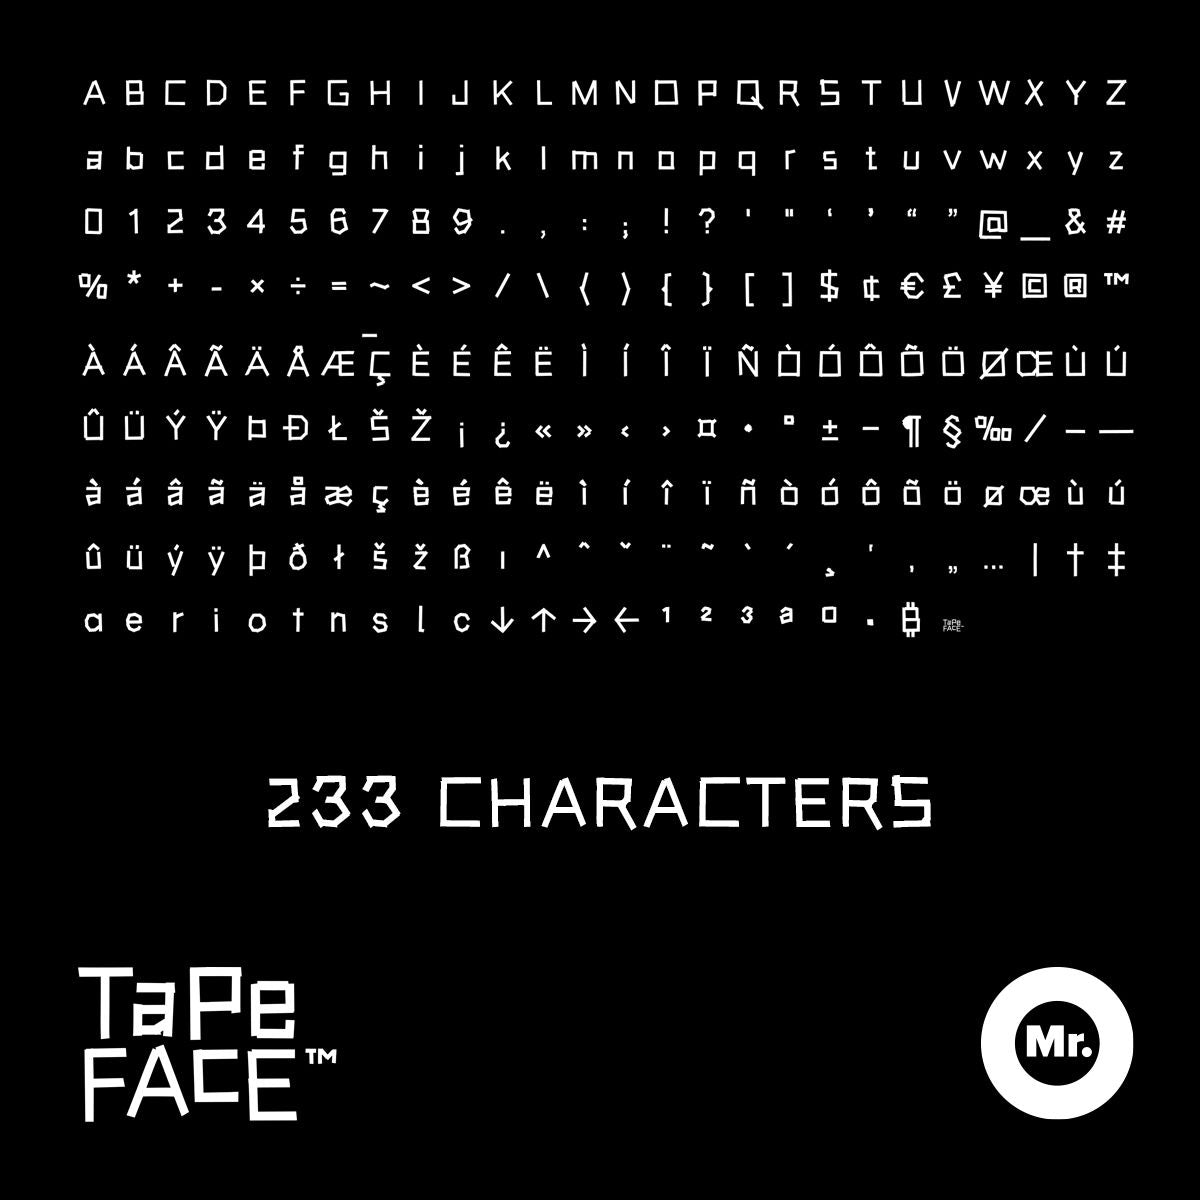 Tape-Face™ Typeface